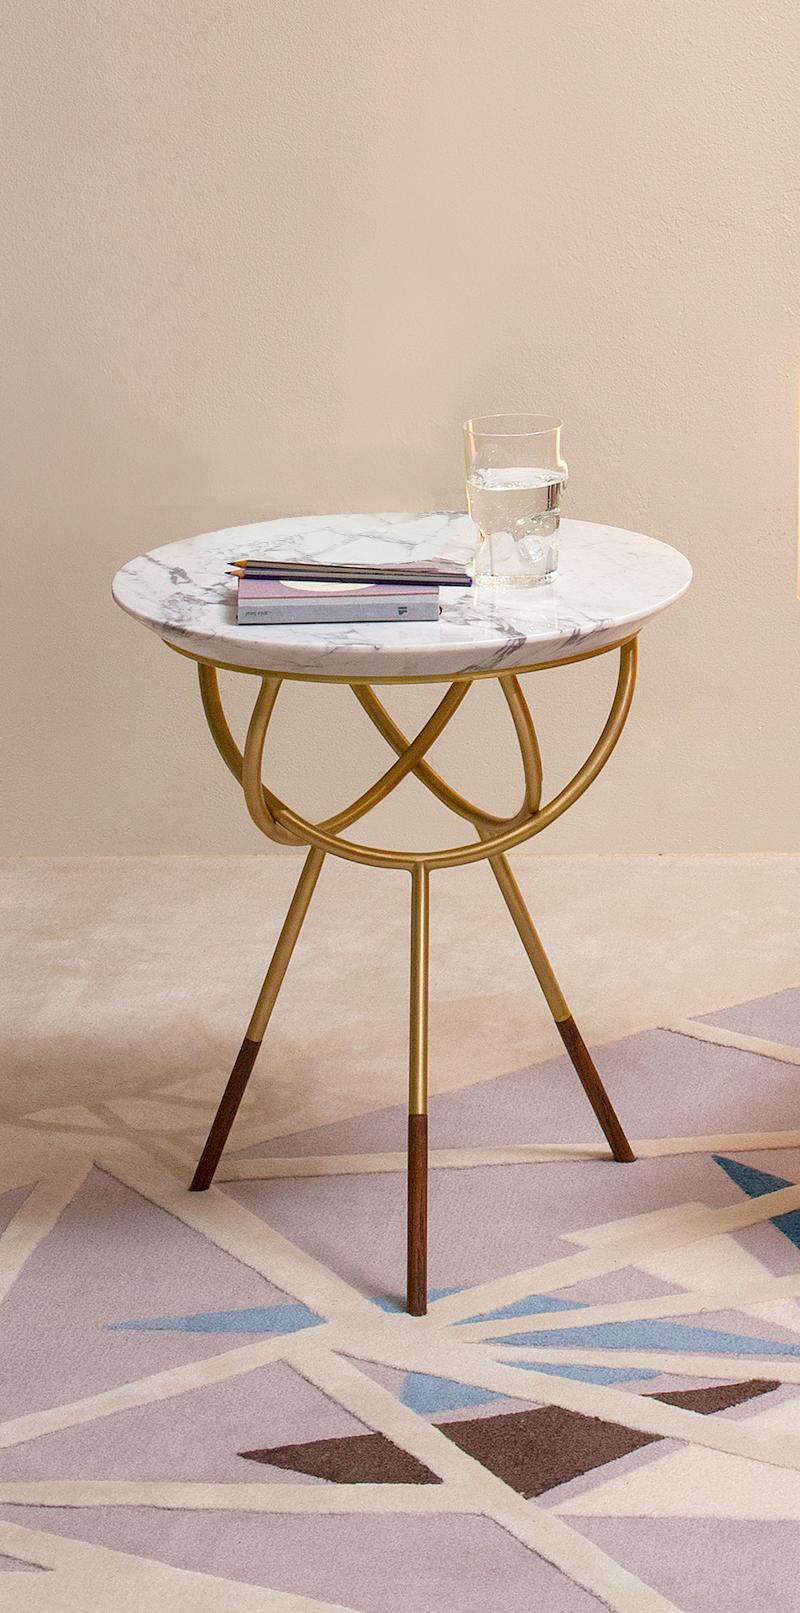 Atlas Brushed Brass Side Table with White Marble Top by Avram Rusu ...